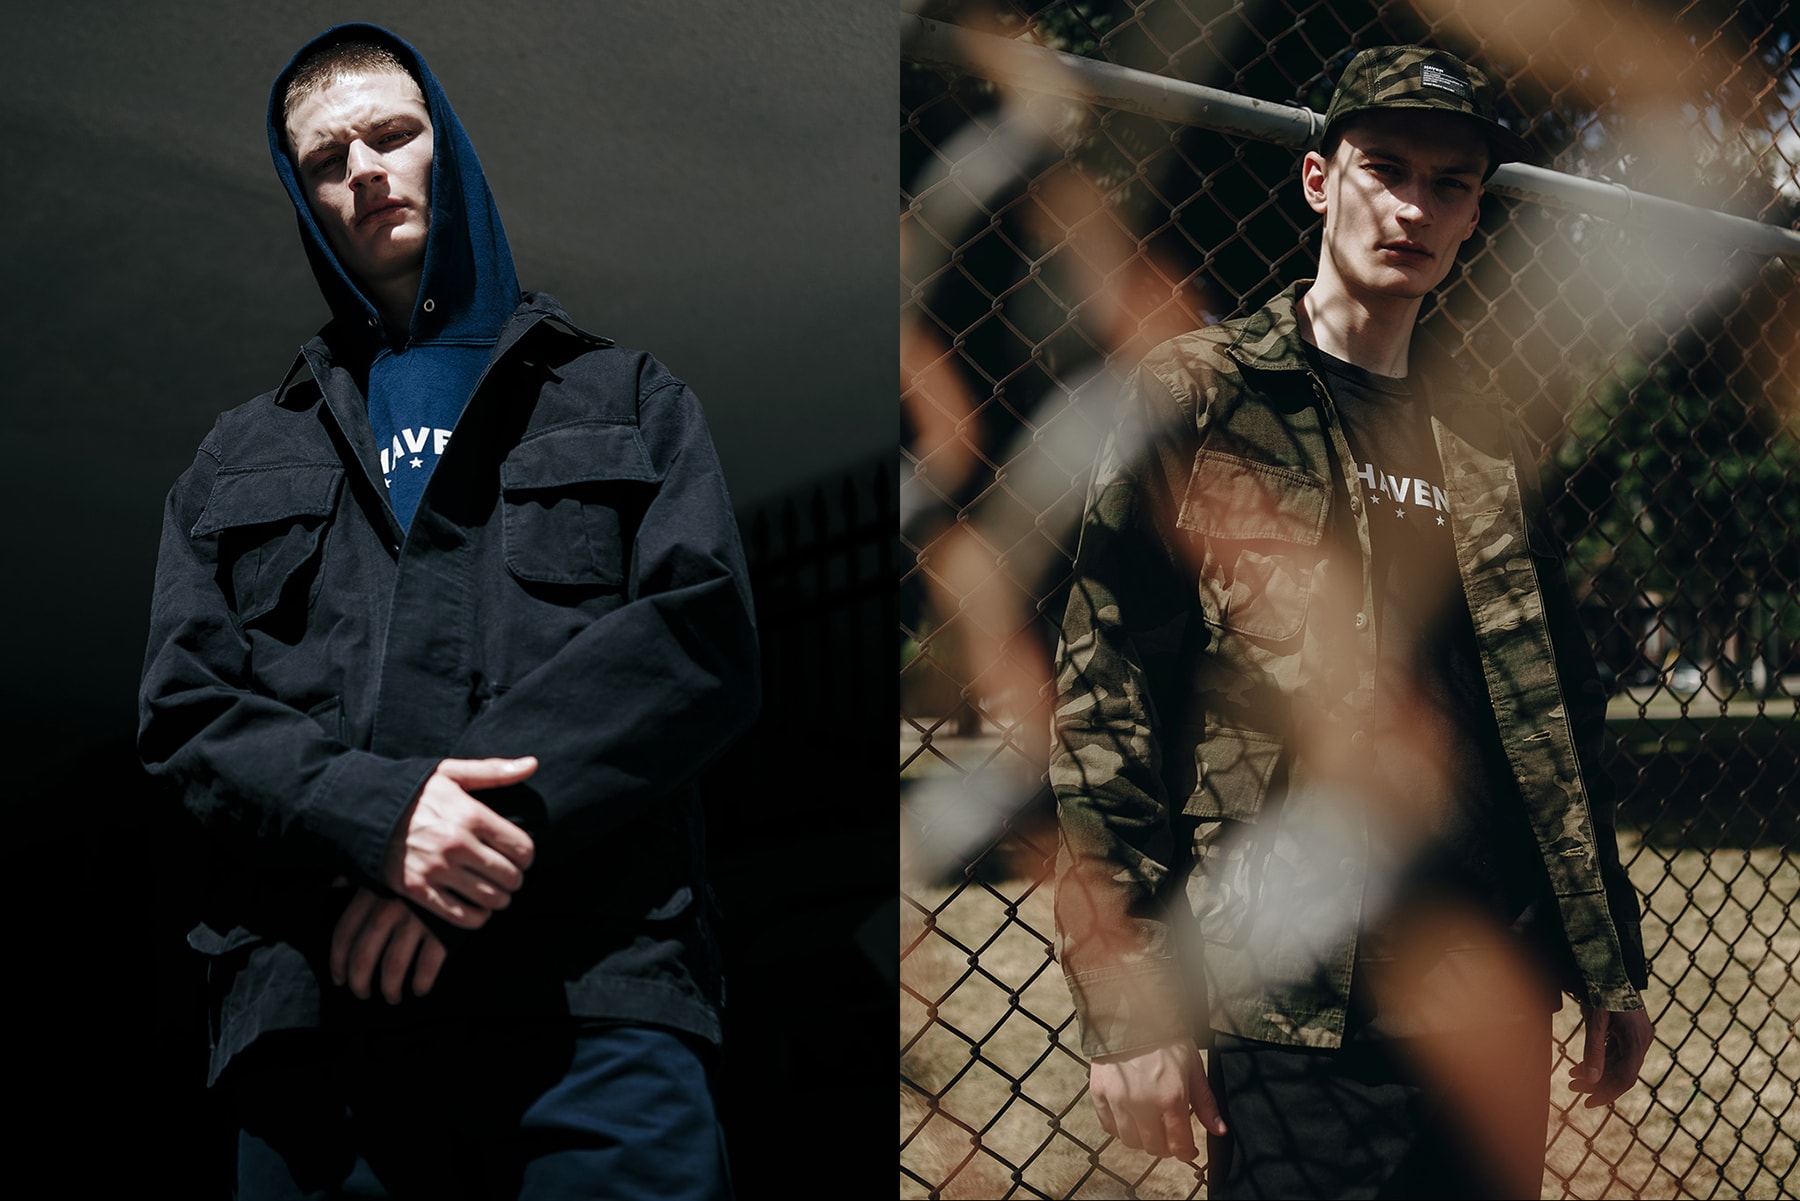 Haven fall winter 2018 delivery drop 1 made in canada japan hoodies tees jackets hats sweaters pants in house label clothing line drop release date buy purchase july 24 2018 drop release date